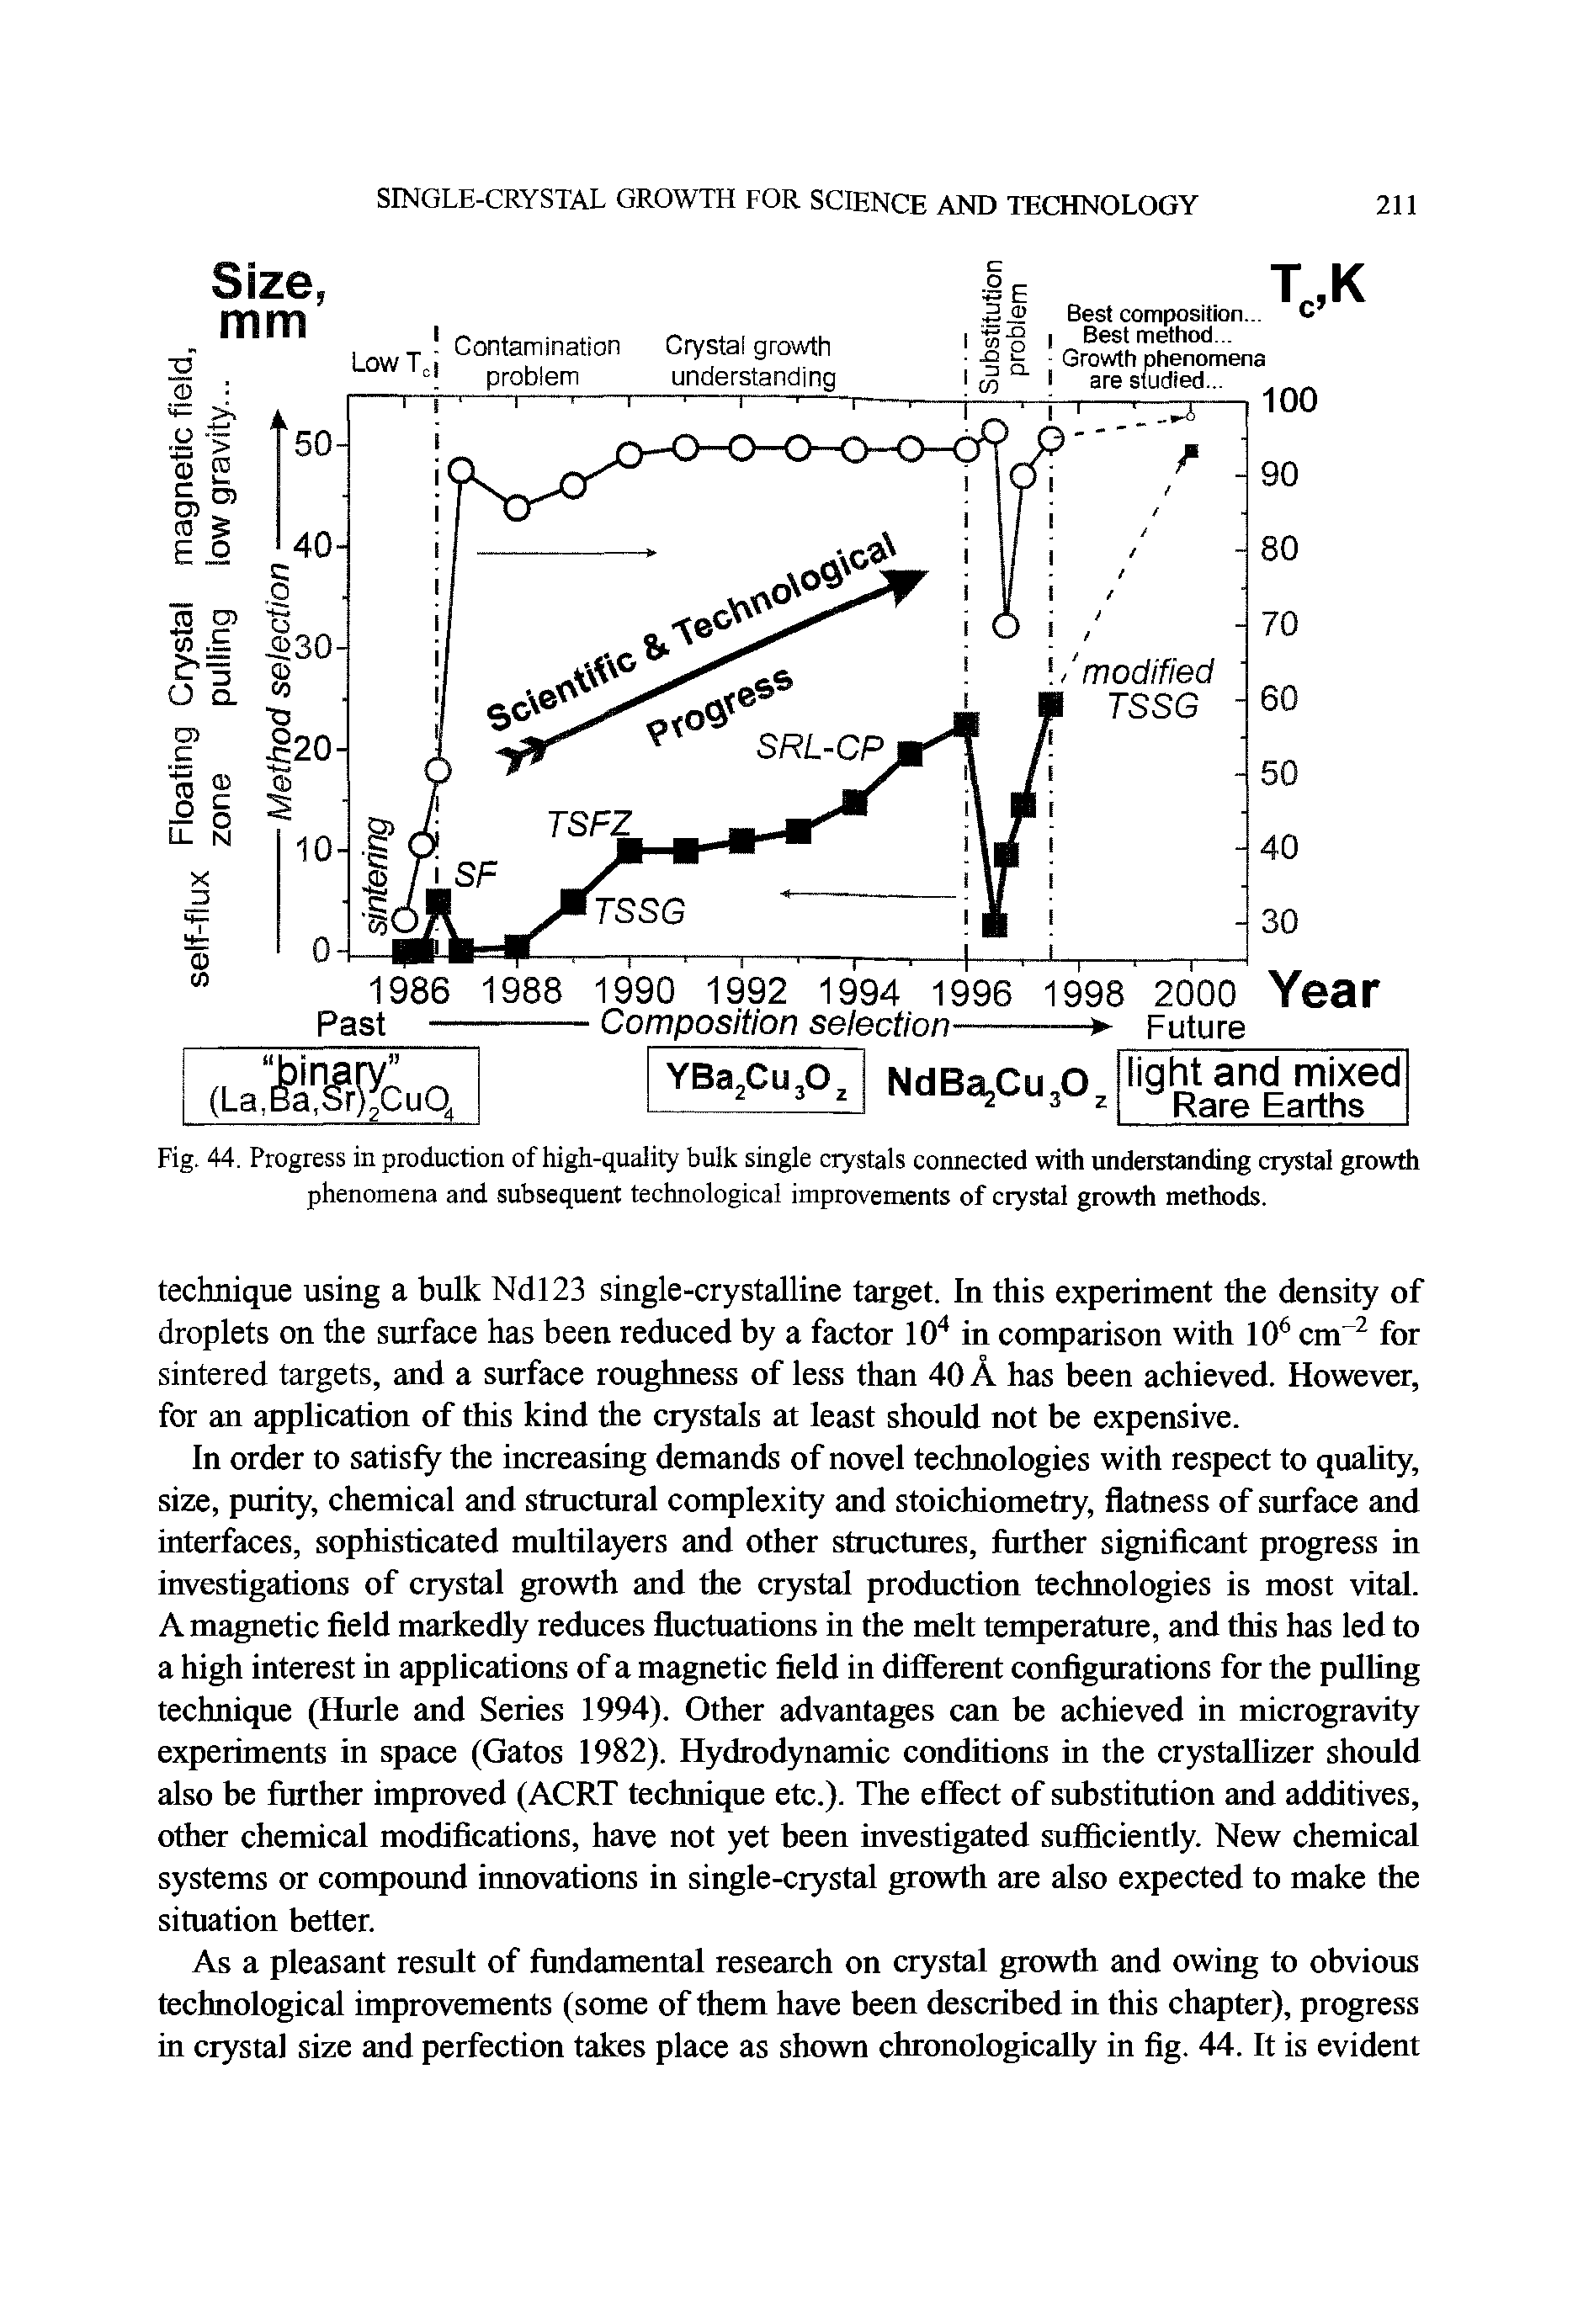 Fig. 44. Progress in production of high-quality bulk single crystals connected with understanding crystal growth phenomena and subsequent technological improvements of crystal growth methods.